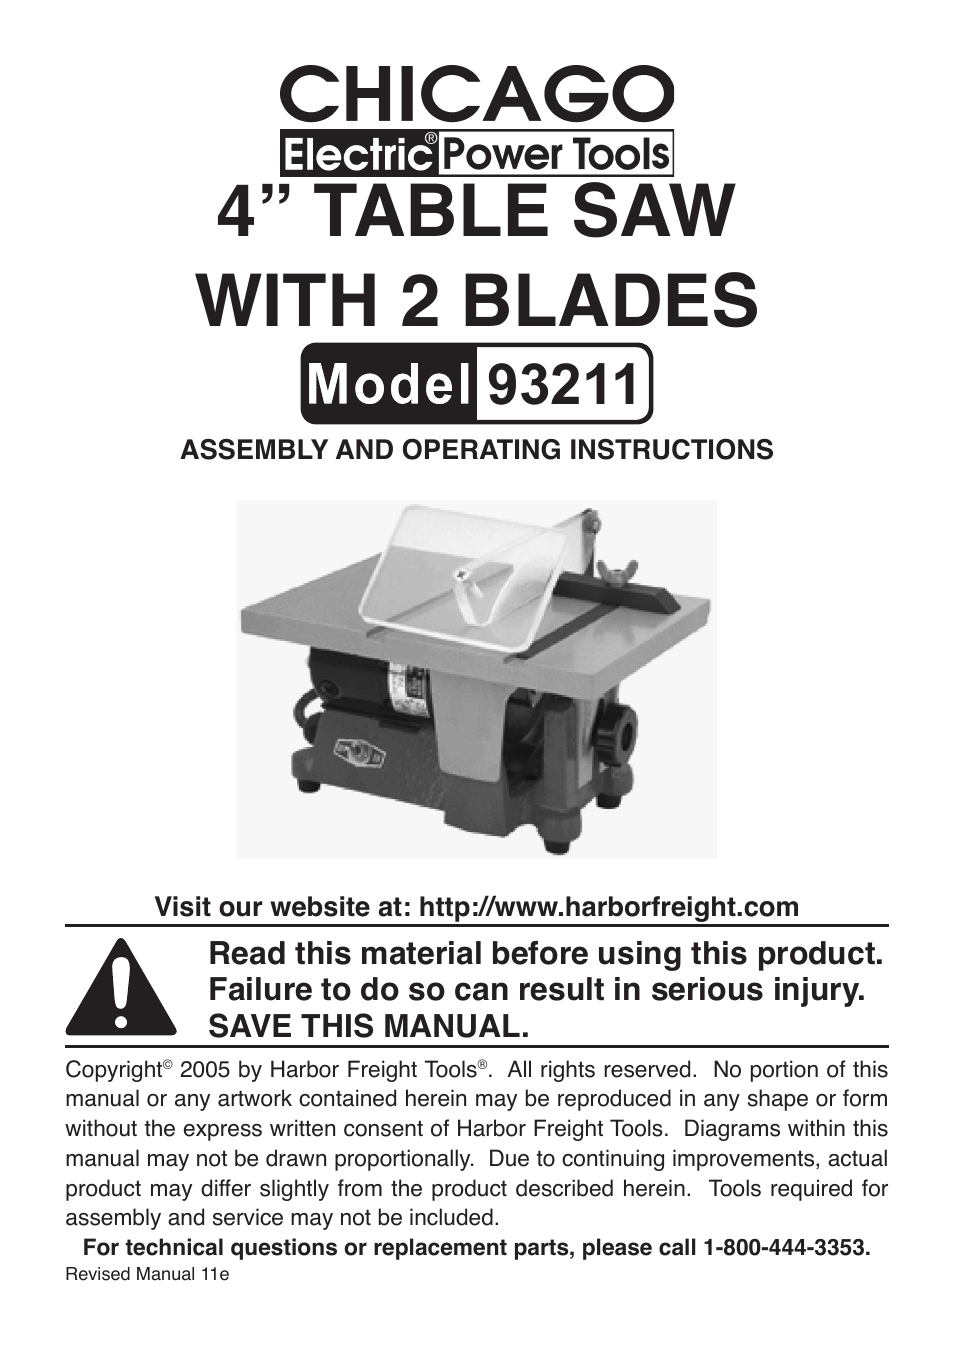 Chicago Electric 4" Table Saw with 2 Blades 93211